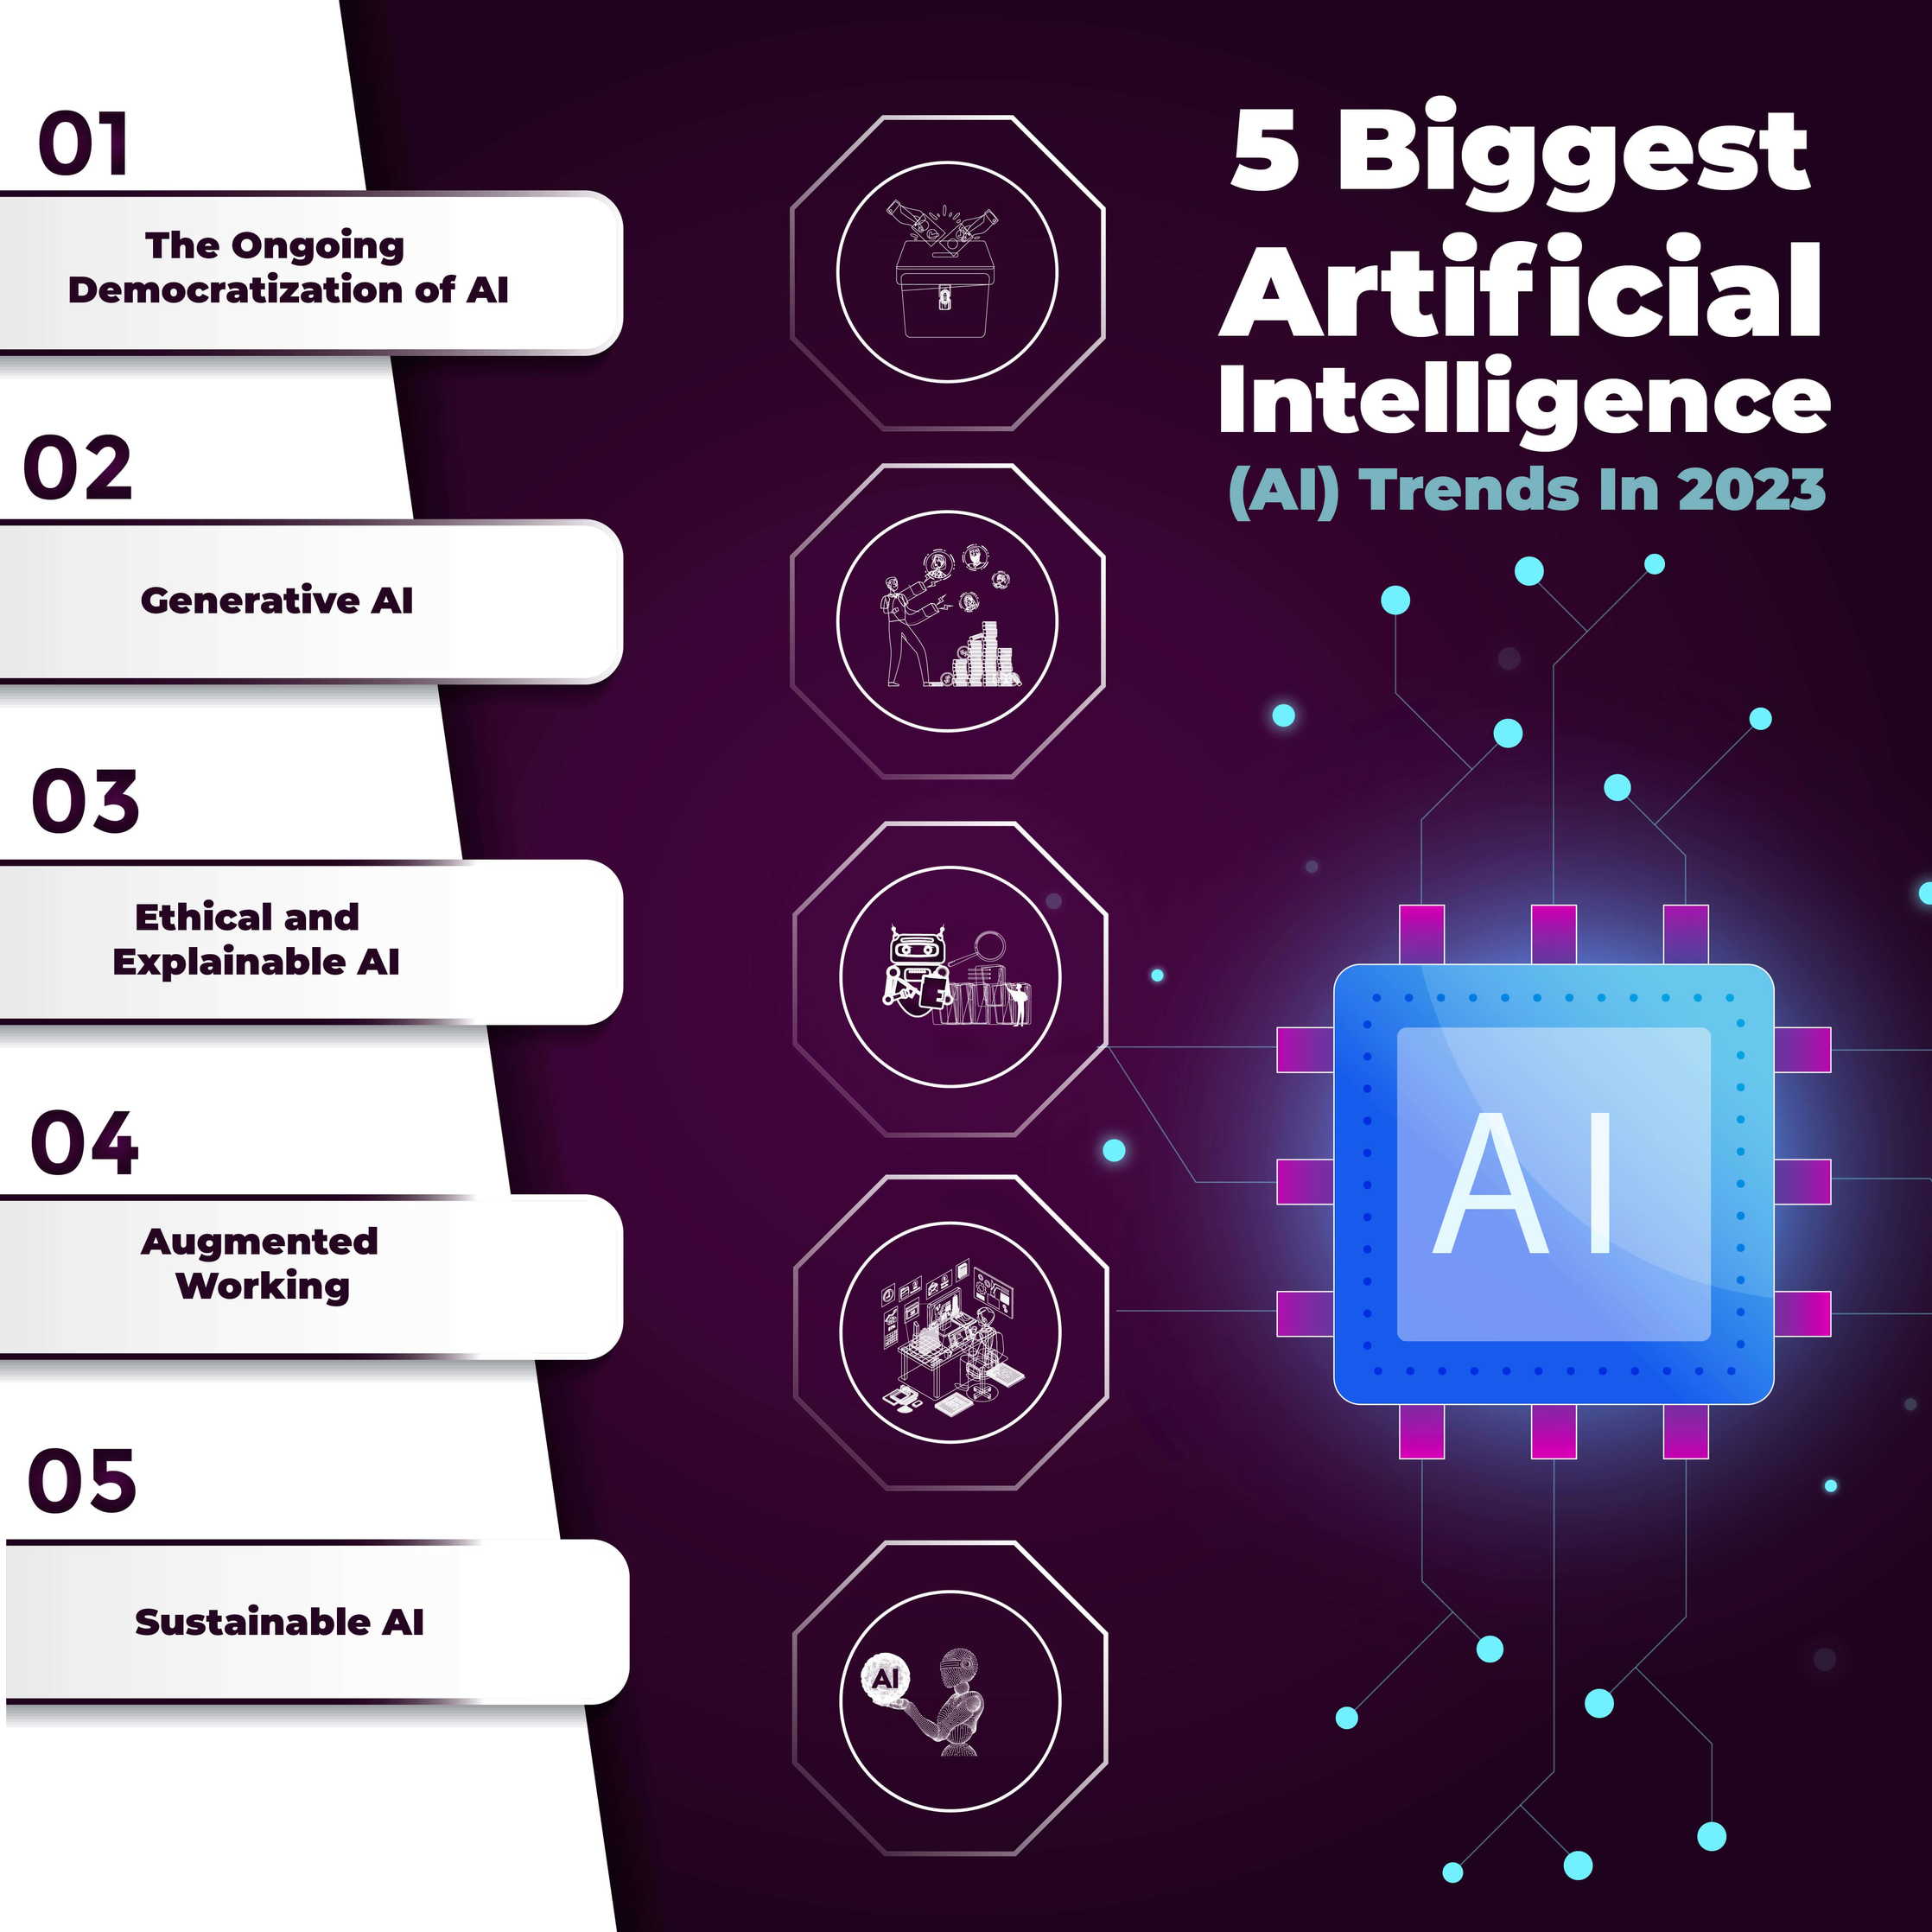 5 Biggest Artificial Intelligence (AI) Trends In 2023 For Cybersecurity